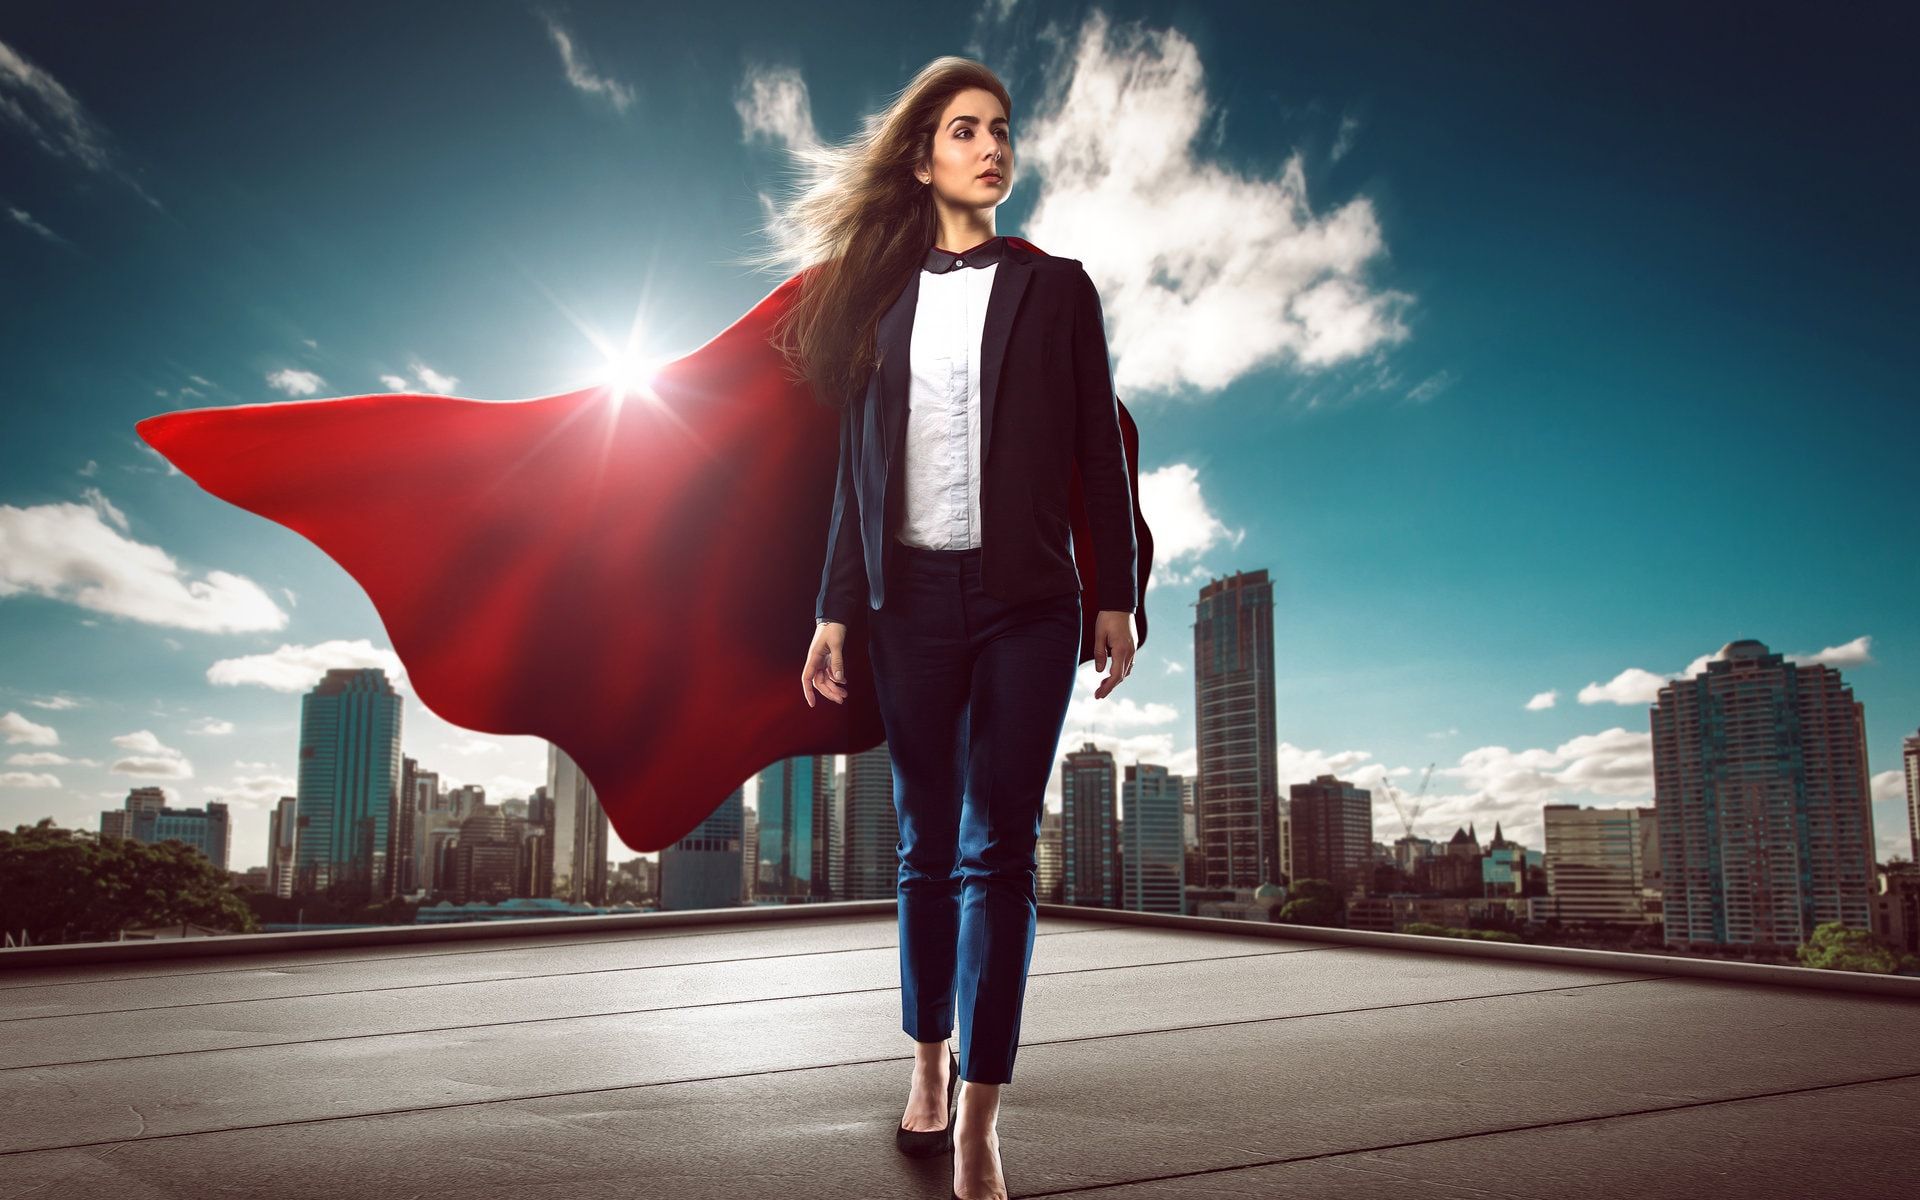 Why Women Break the Glass Ceiling in Small Business